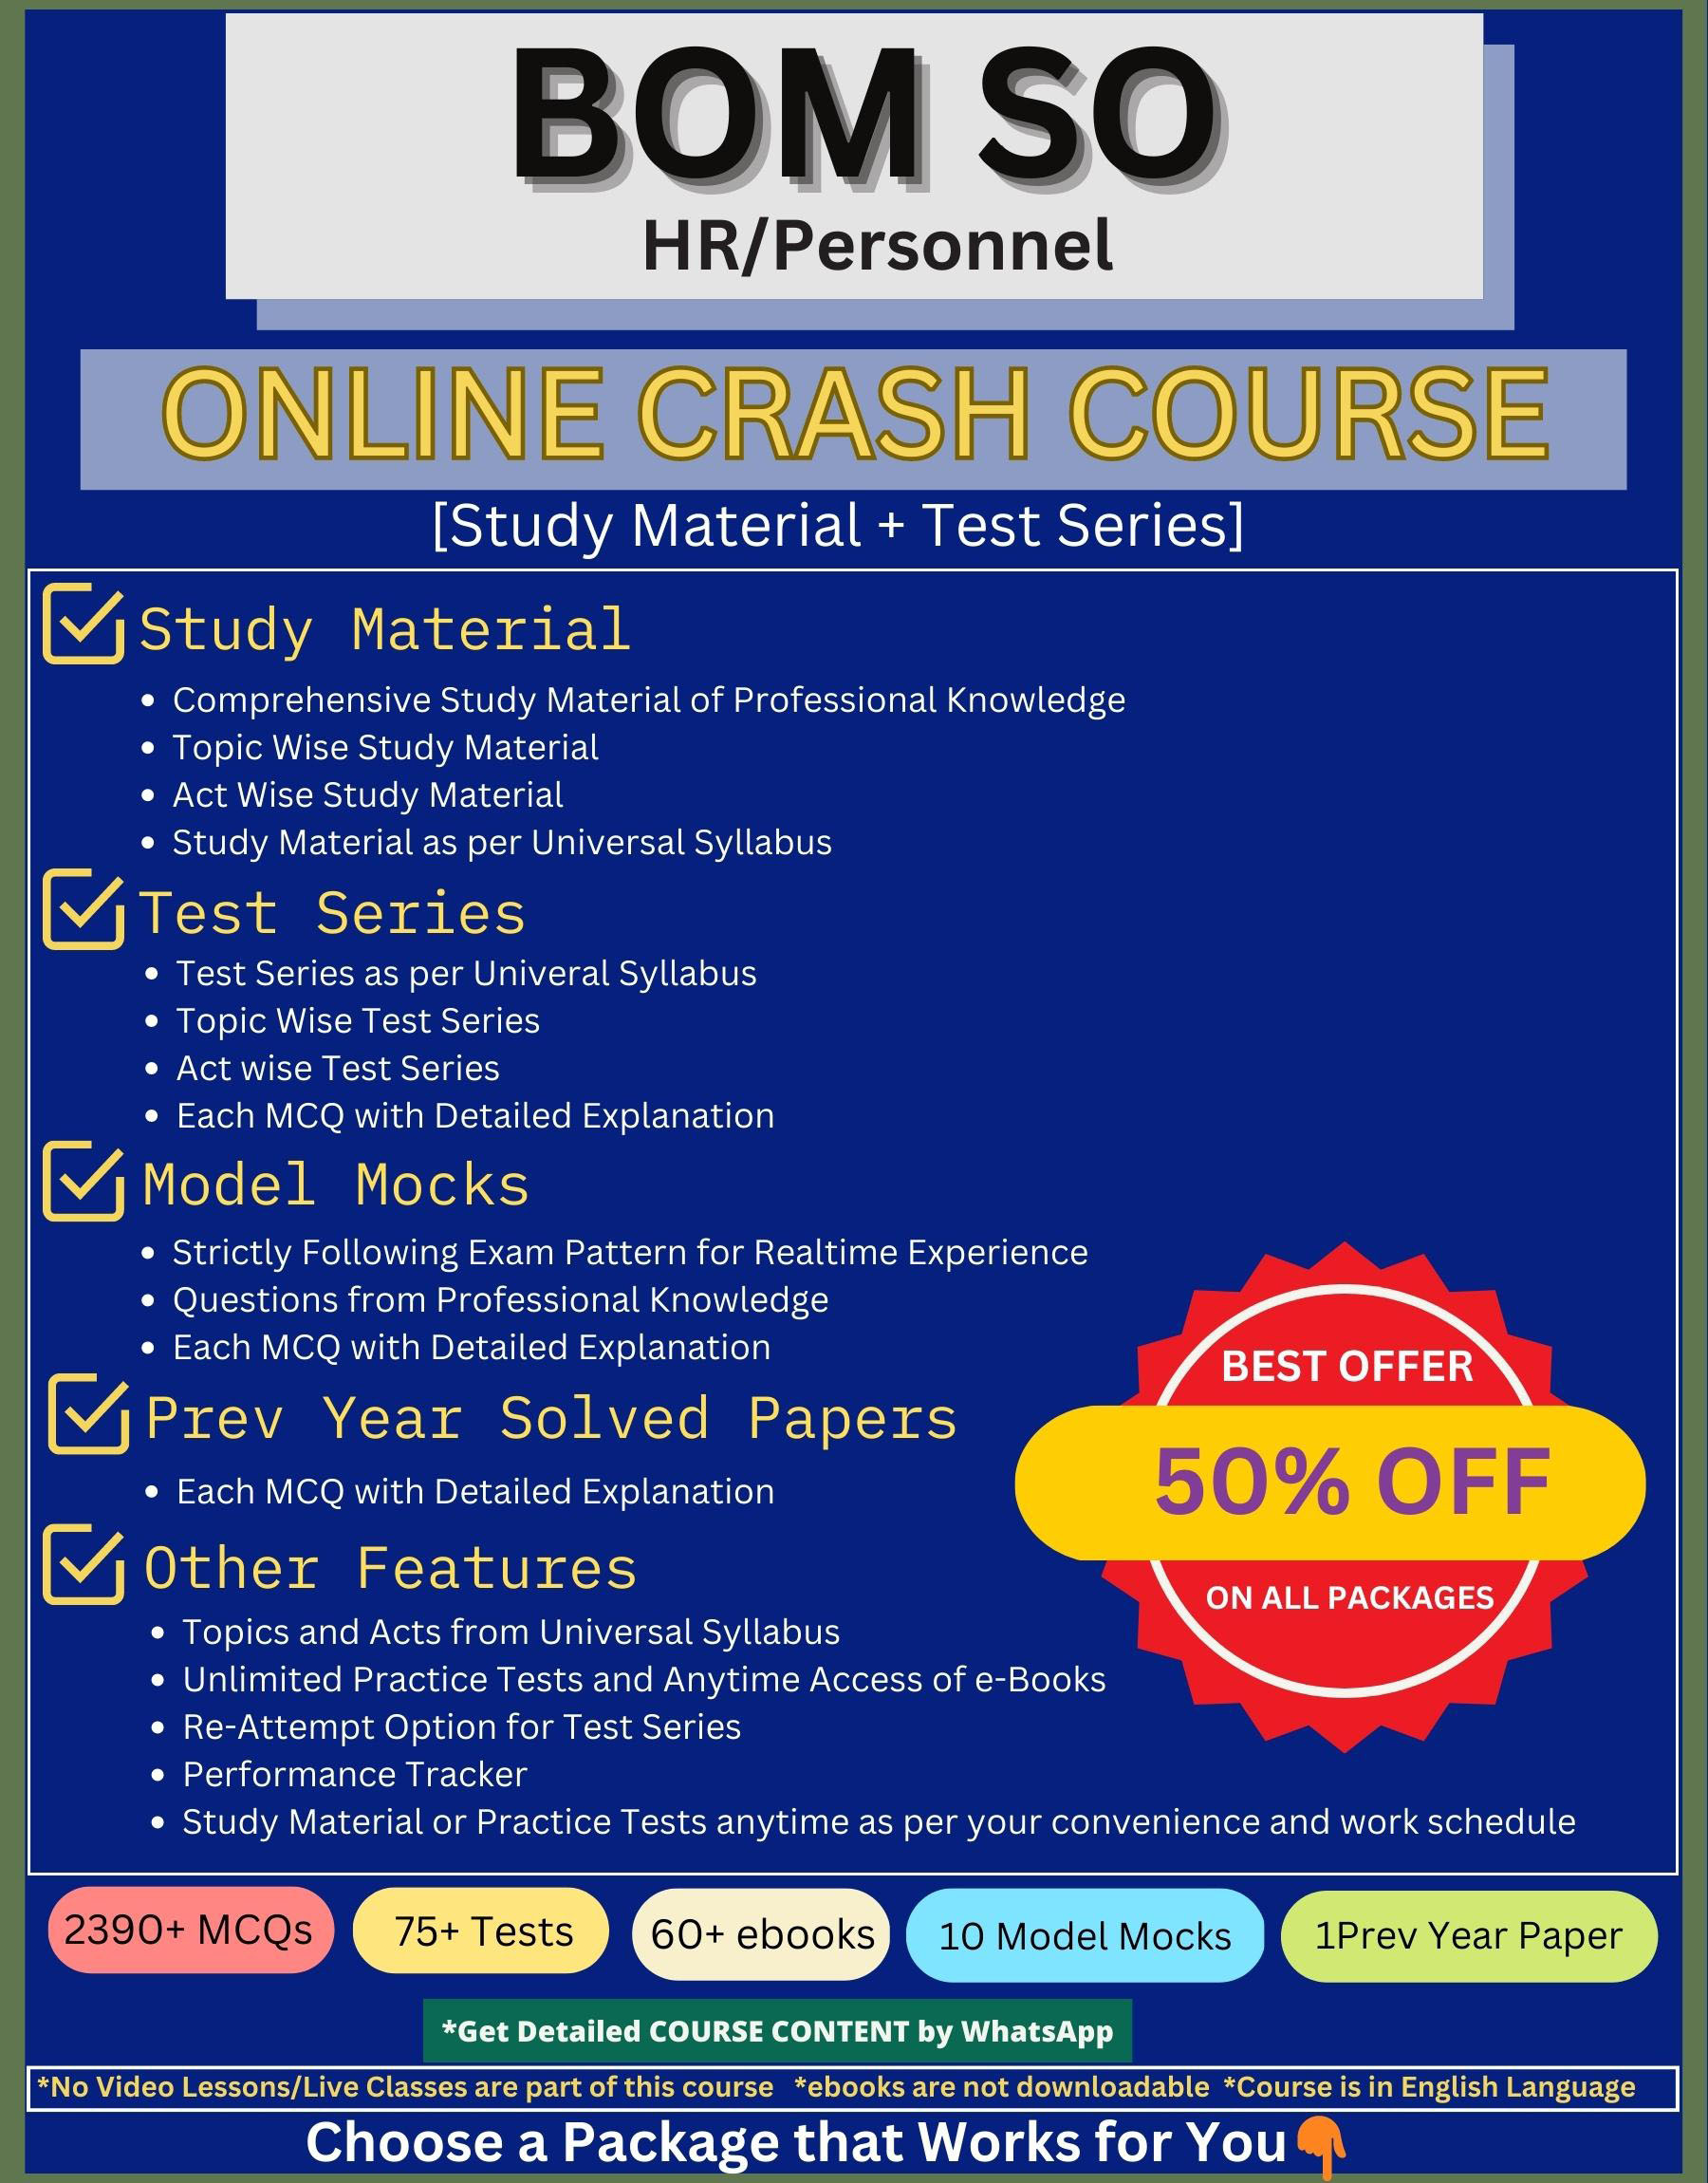 Online course with test series and study materials for BOM SO Personnel HR Exam